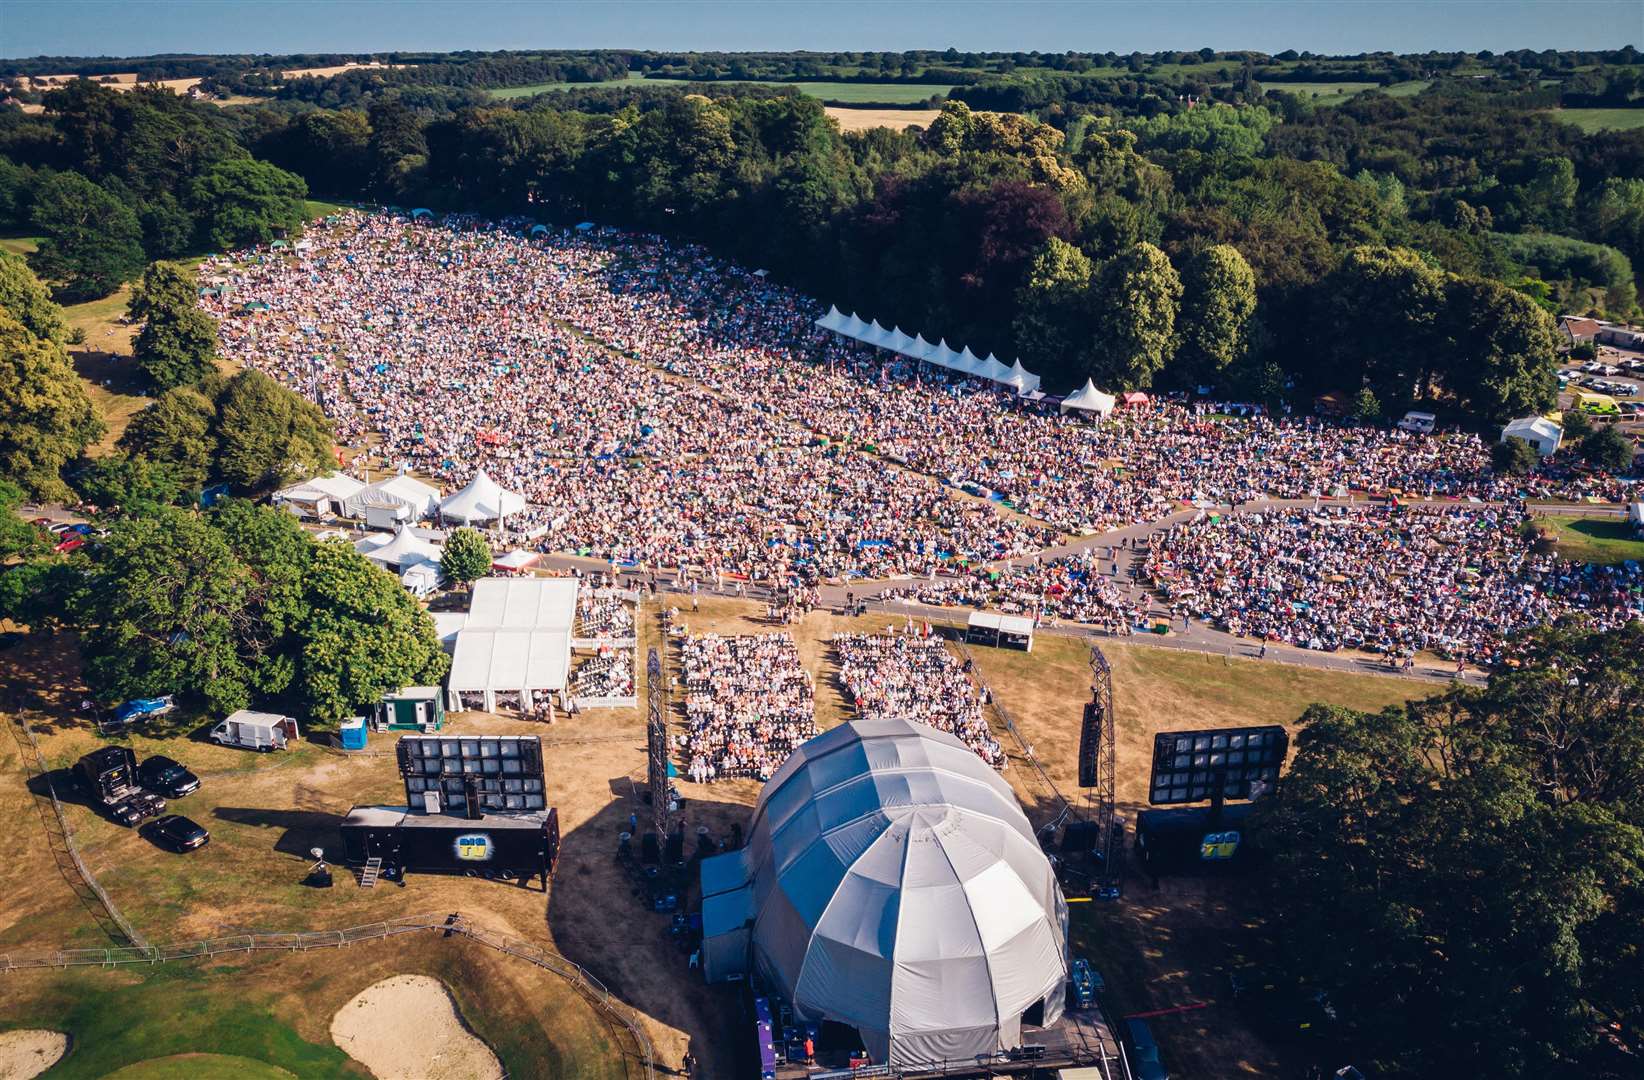 Thousands attend the Leeds Castle classical concert every year